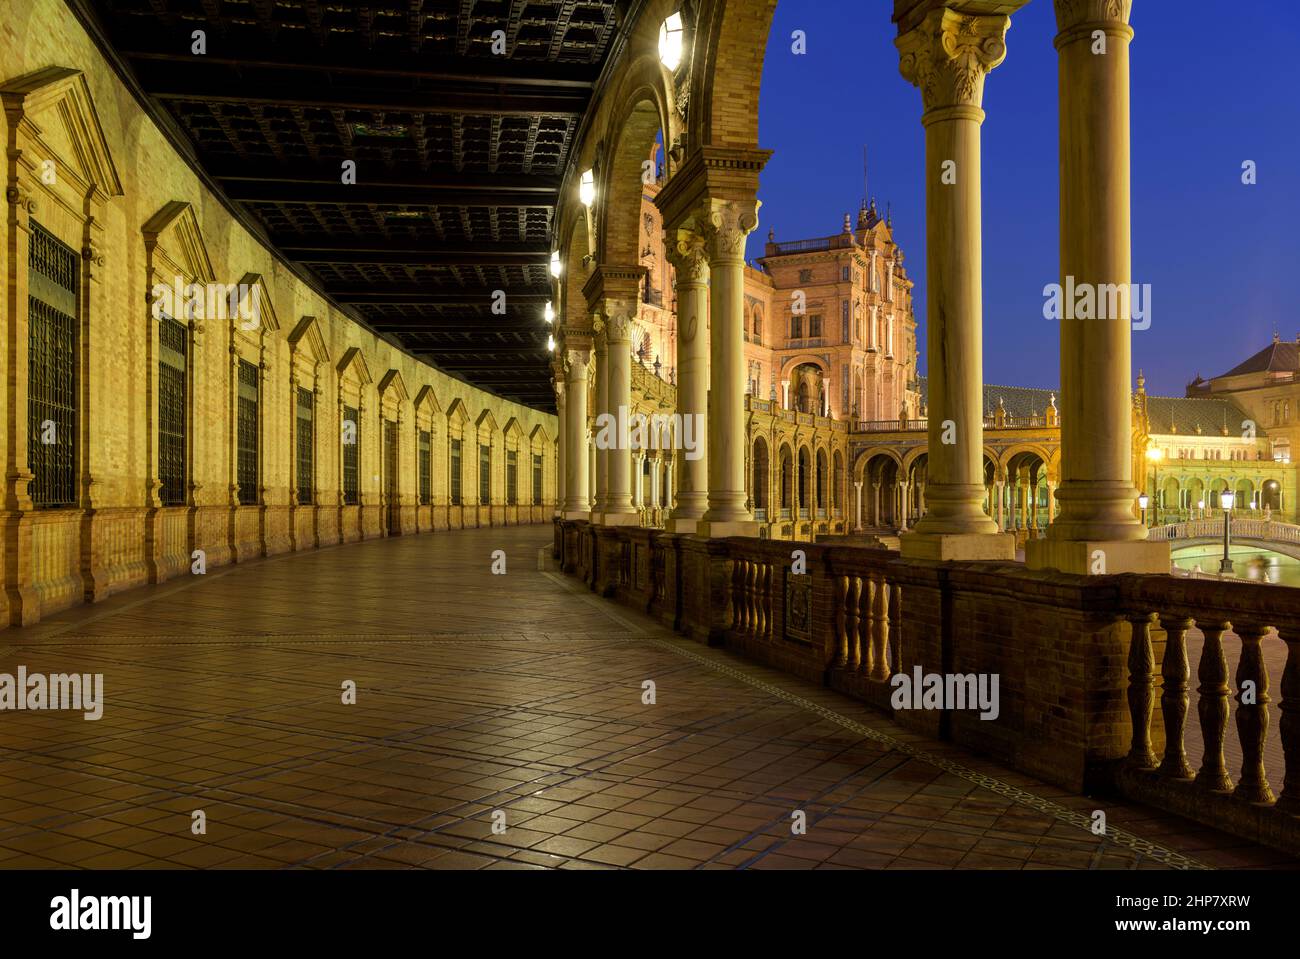 Spanish Square - Wide-angle dusk view of illuminated ground-level portico curving along semi-circular brick building at Spanish Square, Seville, Spain. Stock Photo